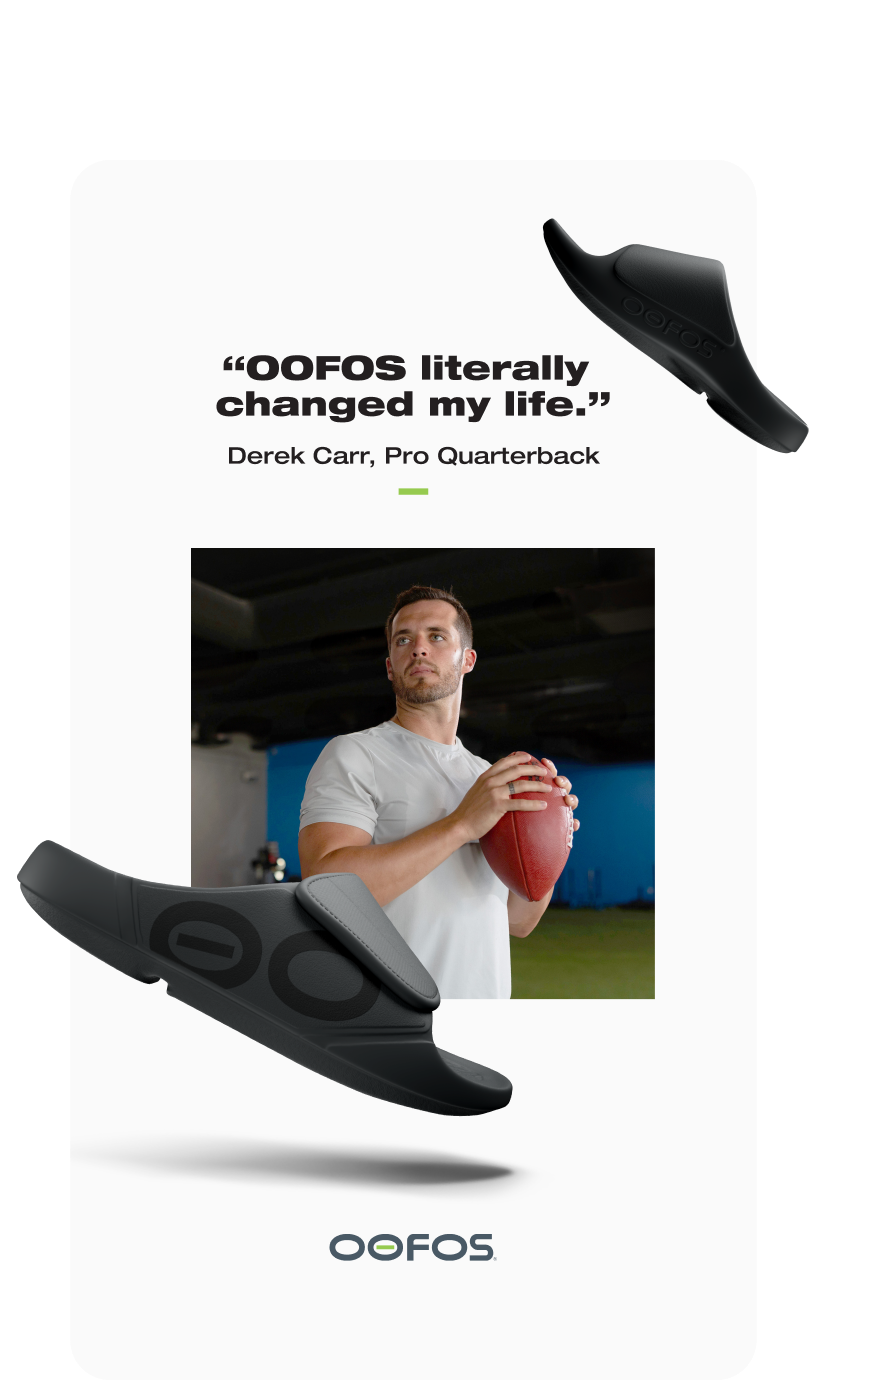 Paid social ad for OOFOS